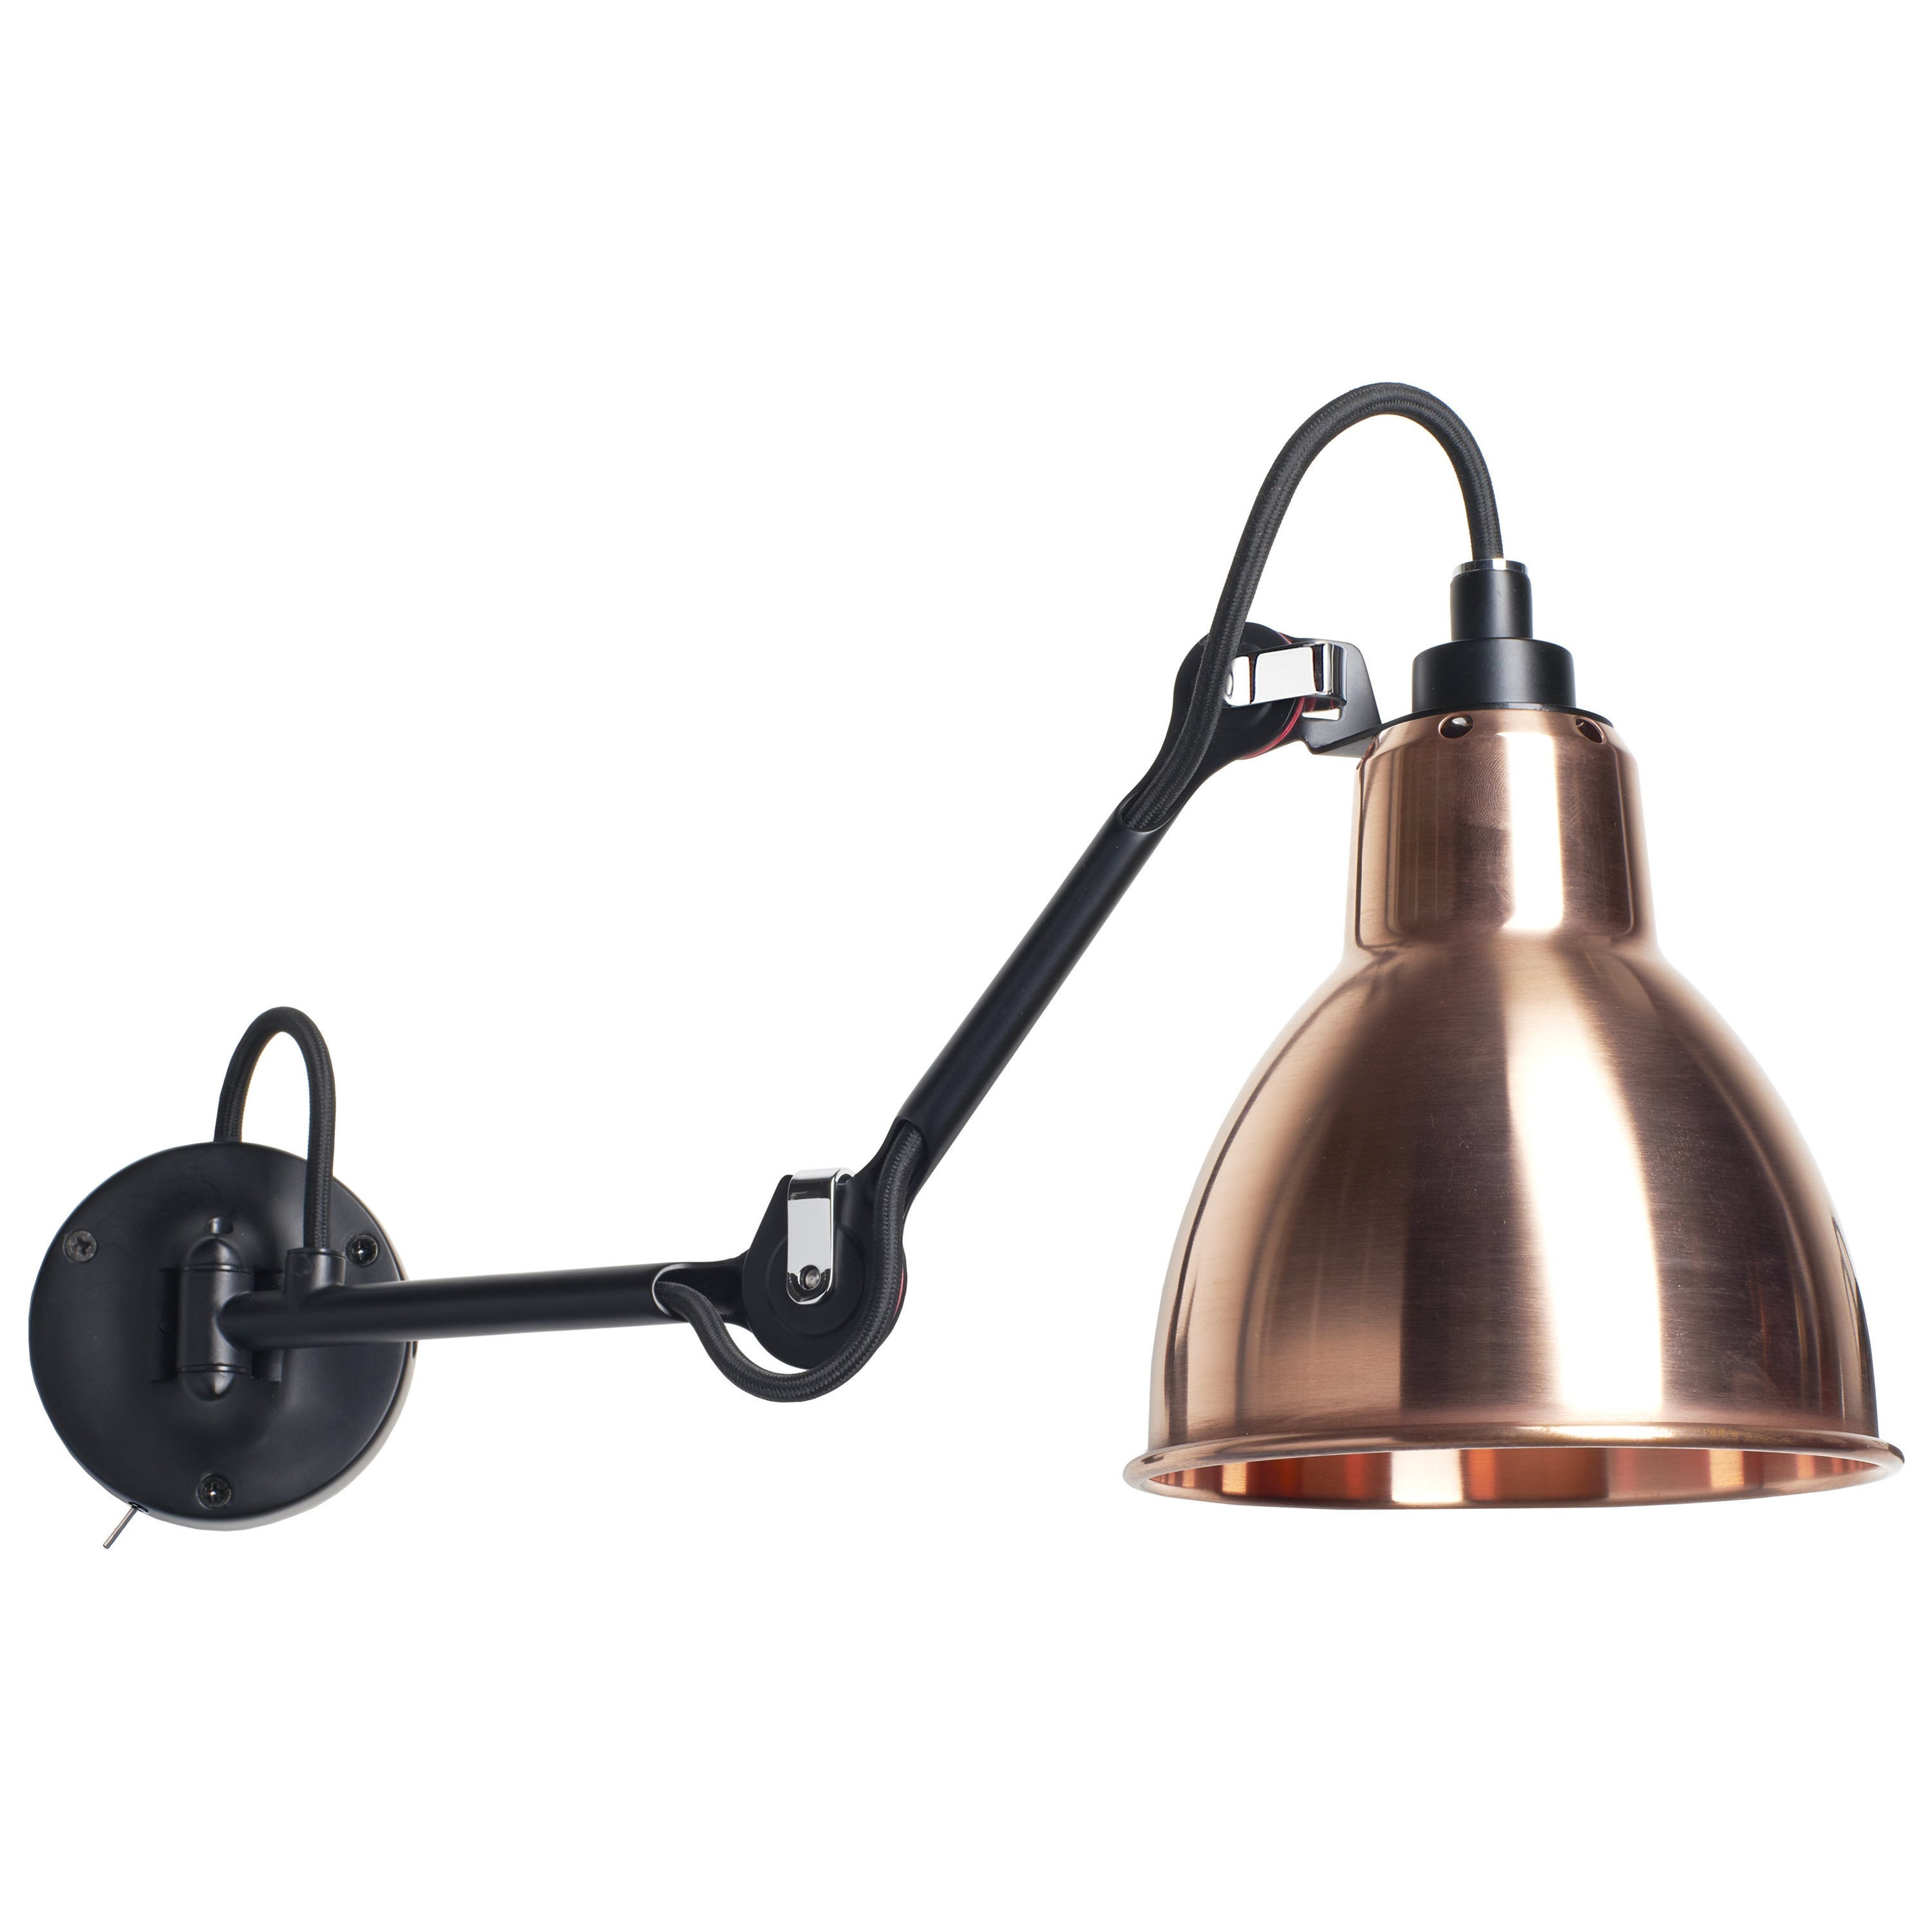 DCW Editions La Lampe Gras N°204 SW Wall Lamp in Black Arm & Raw Copper Shade For Sale